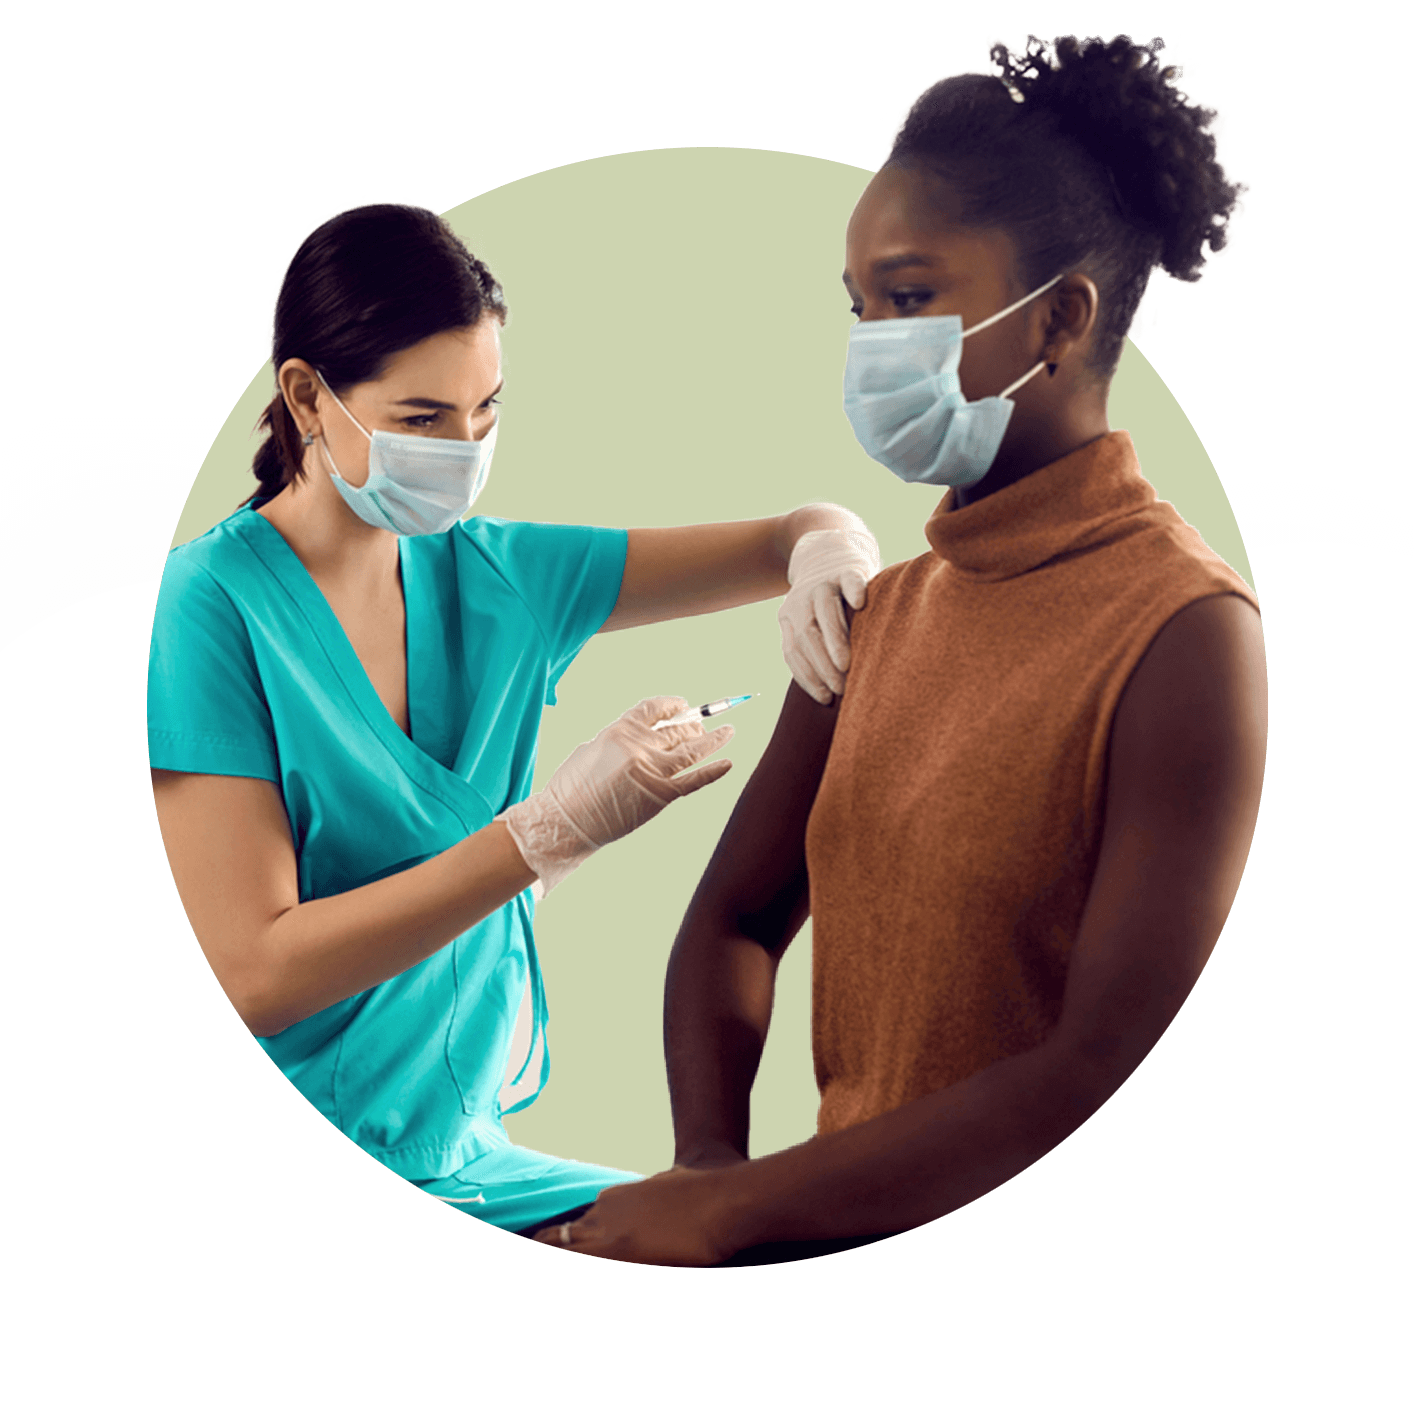 Female nurse administering vaccine to female patient, both wearing masks